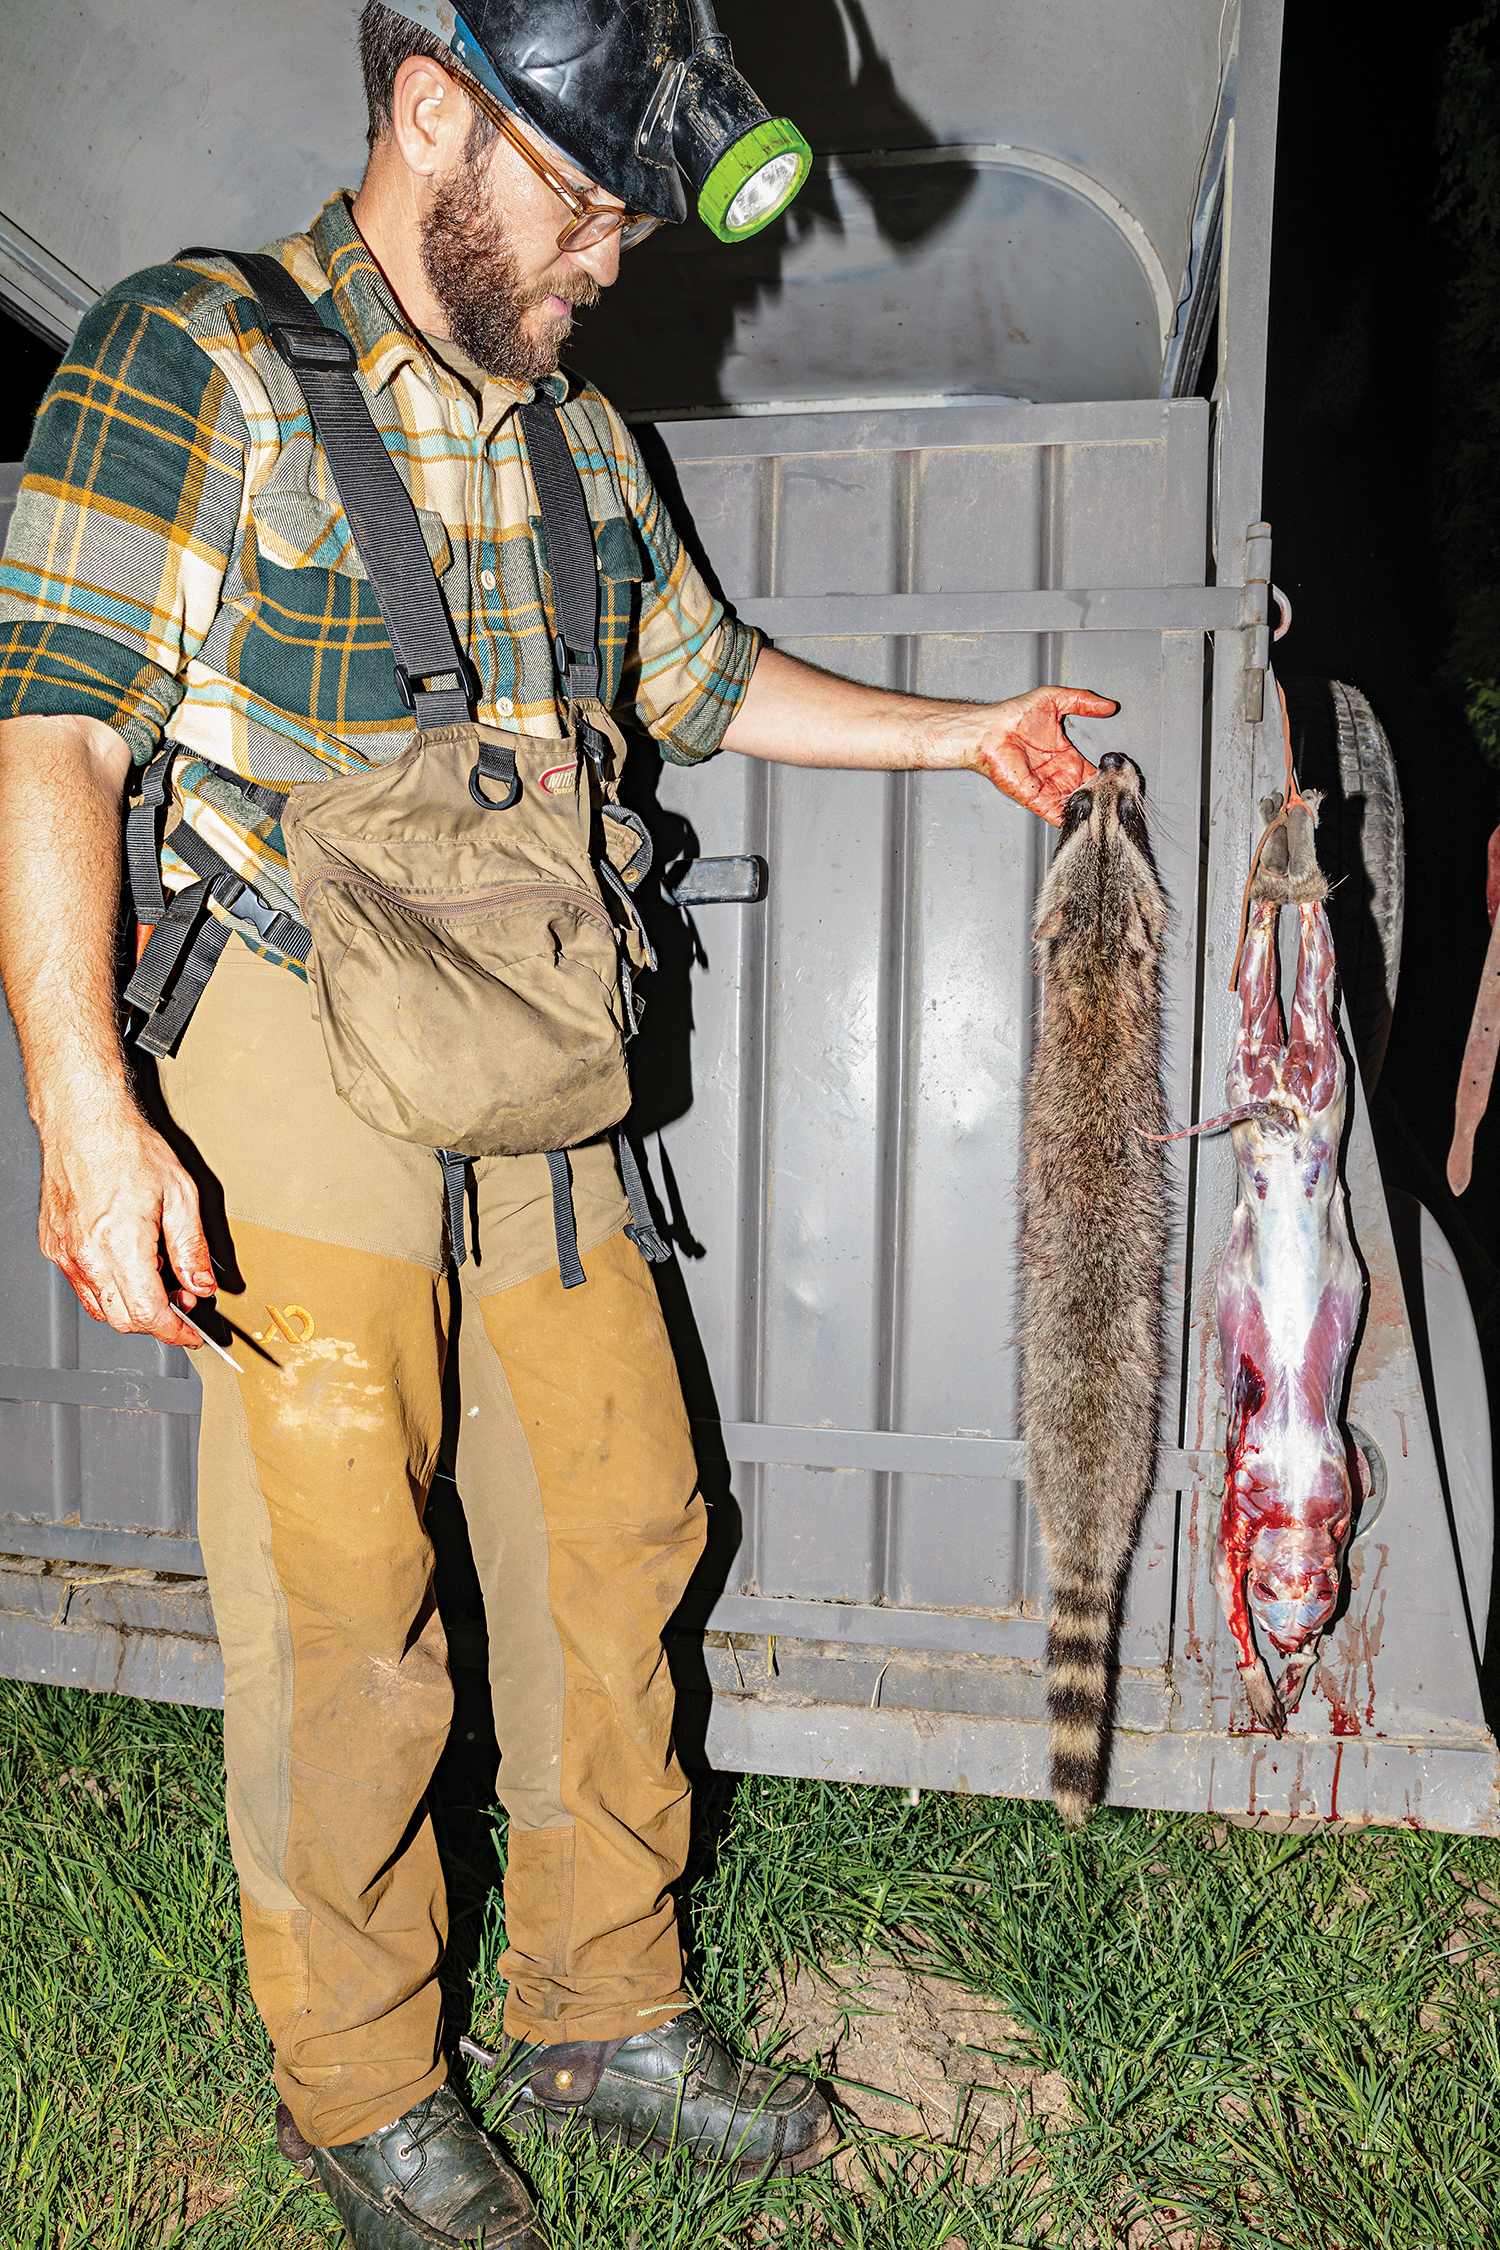 hunter holds up pelt and views skinned raccoon